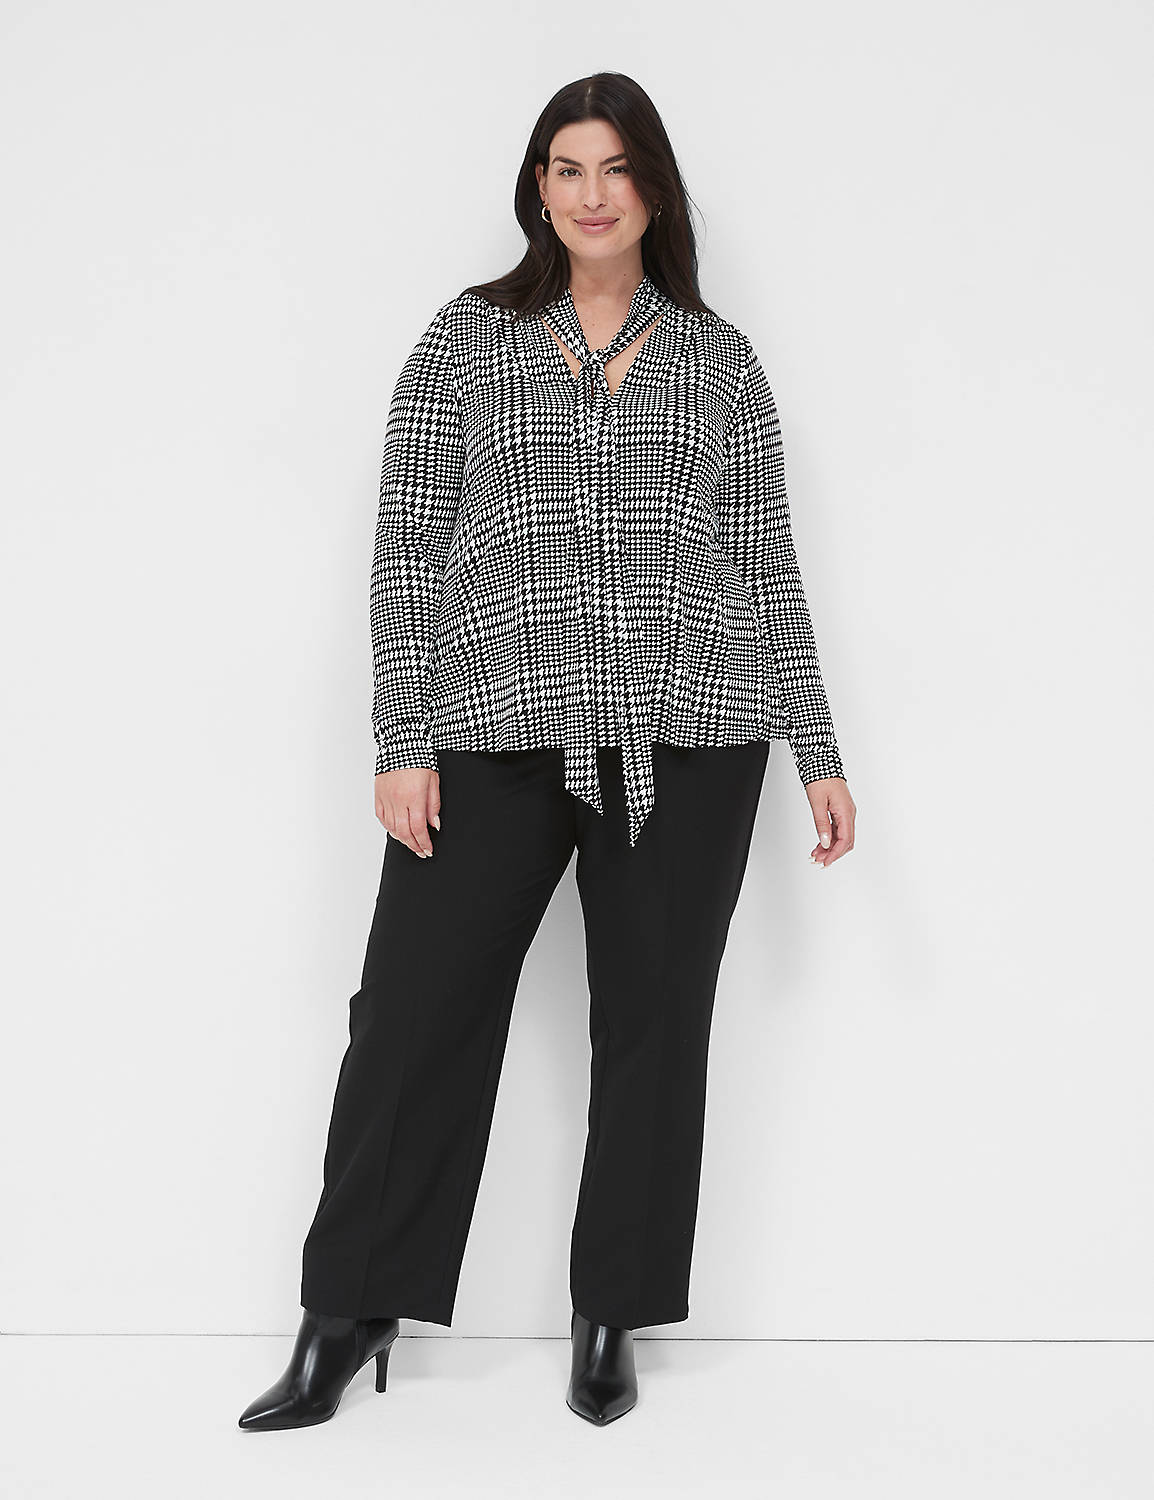 Classic Long Sleeve V Neck With Tie | LaneBryant